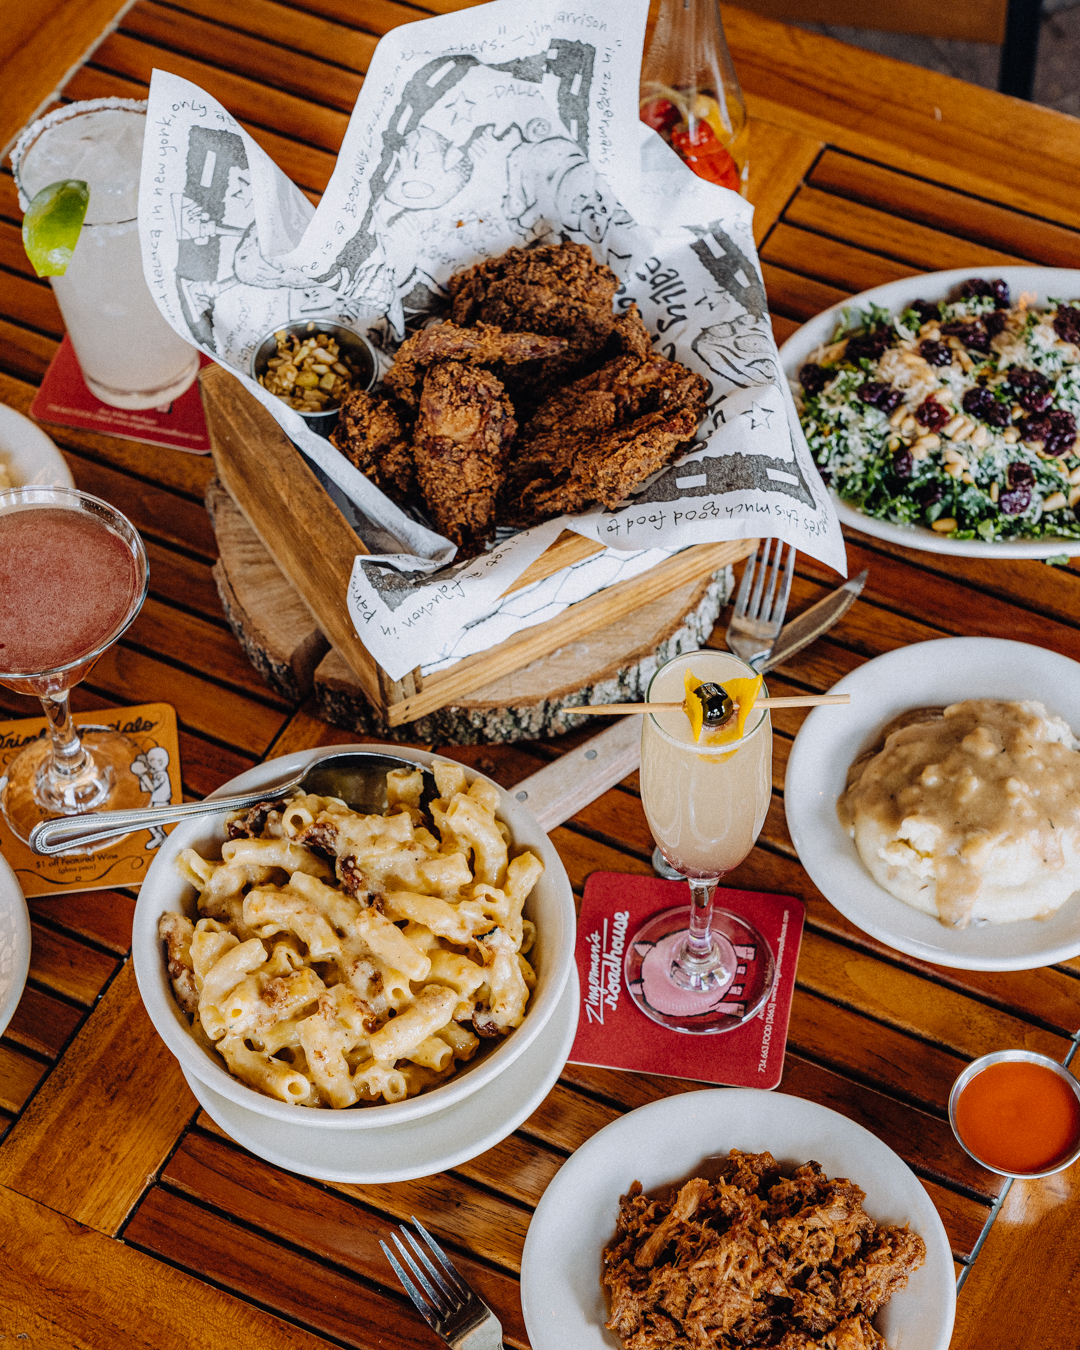 A spread of fried chicken, mac and cheese, salad, mashed potatoes, BBQ, and more